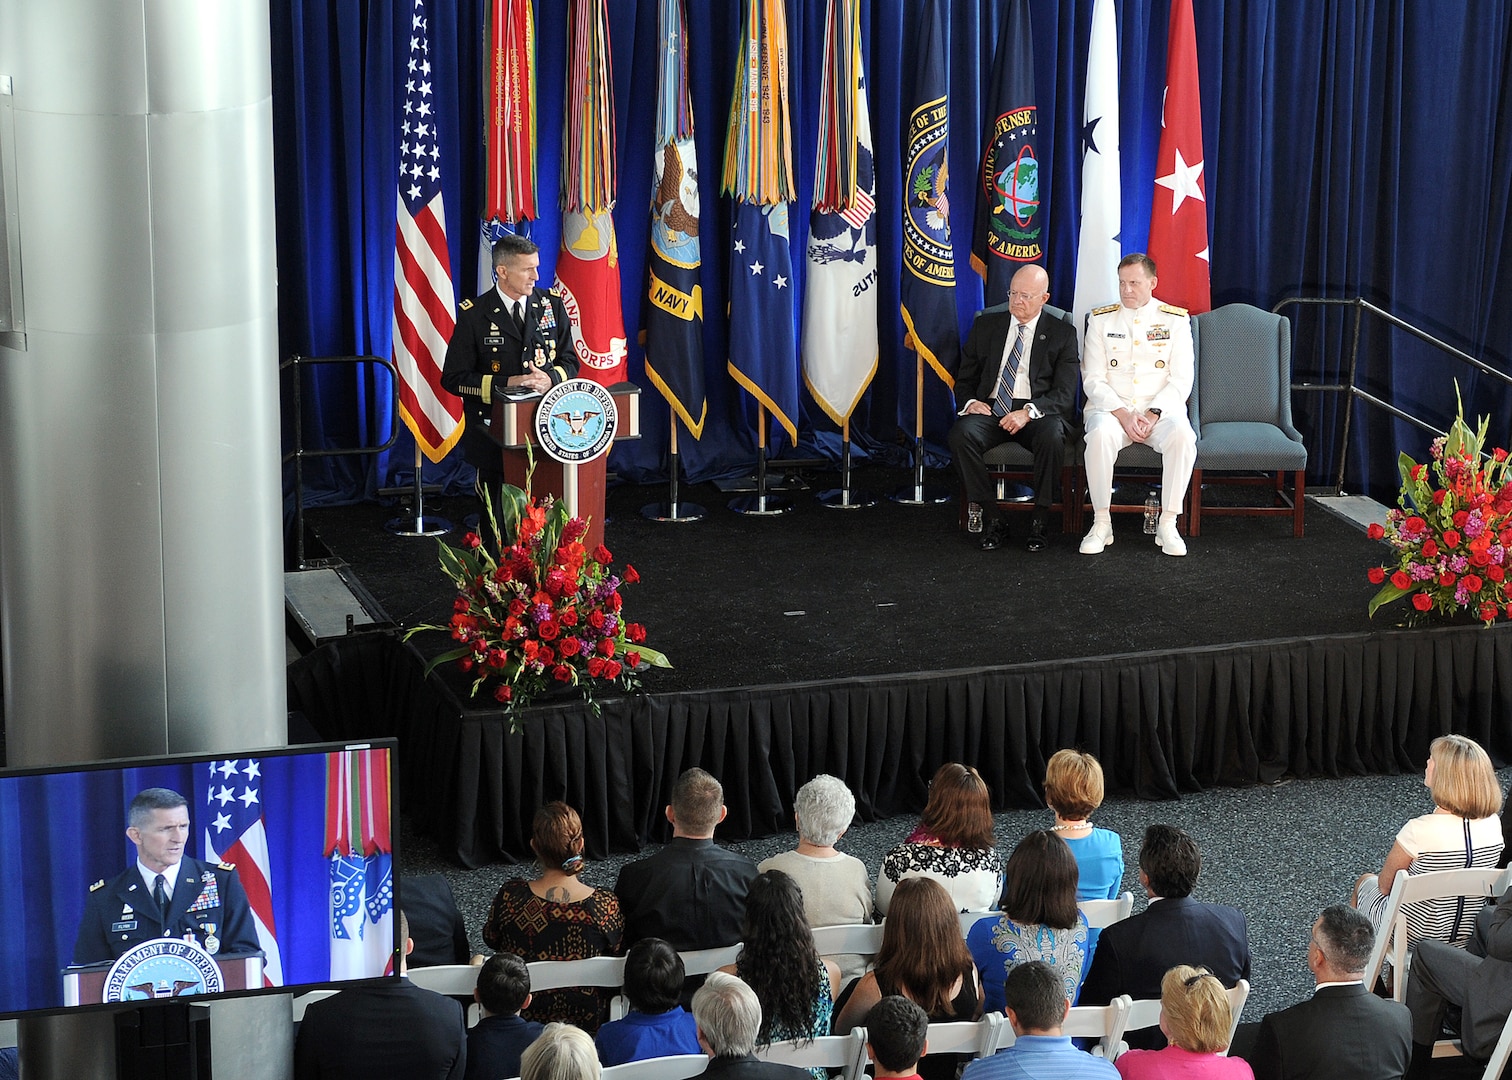 Lt. Gen. Michael Flynn speaks to family, friends and colleagues during his retirement ceremony at DIA Headquarters Aug. 7. Joining him on stage were Director of National Intelligence James Clapper and Director of the National Security Agency Adm. Michael Rogers.